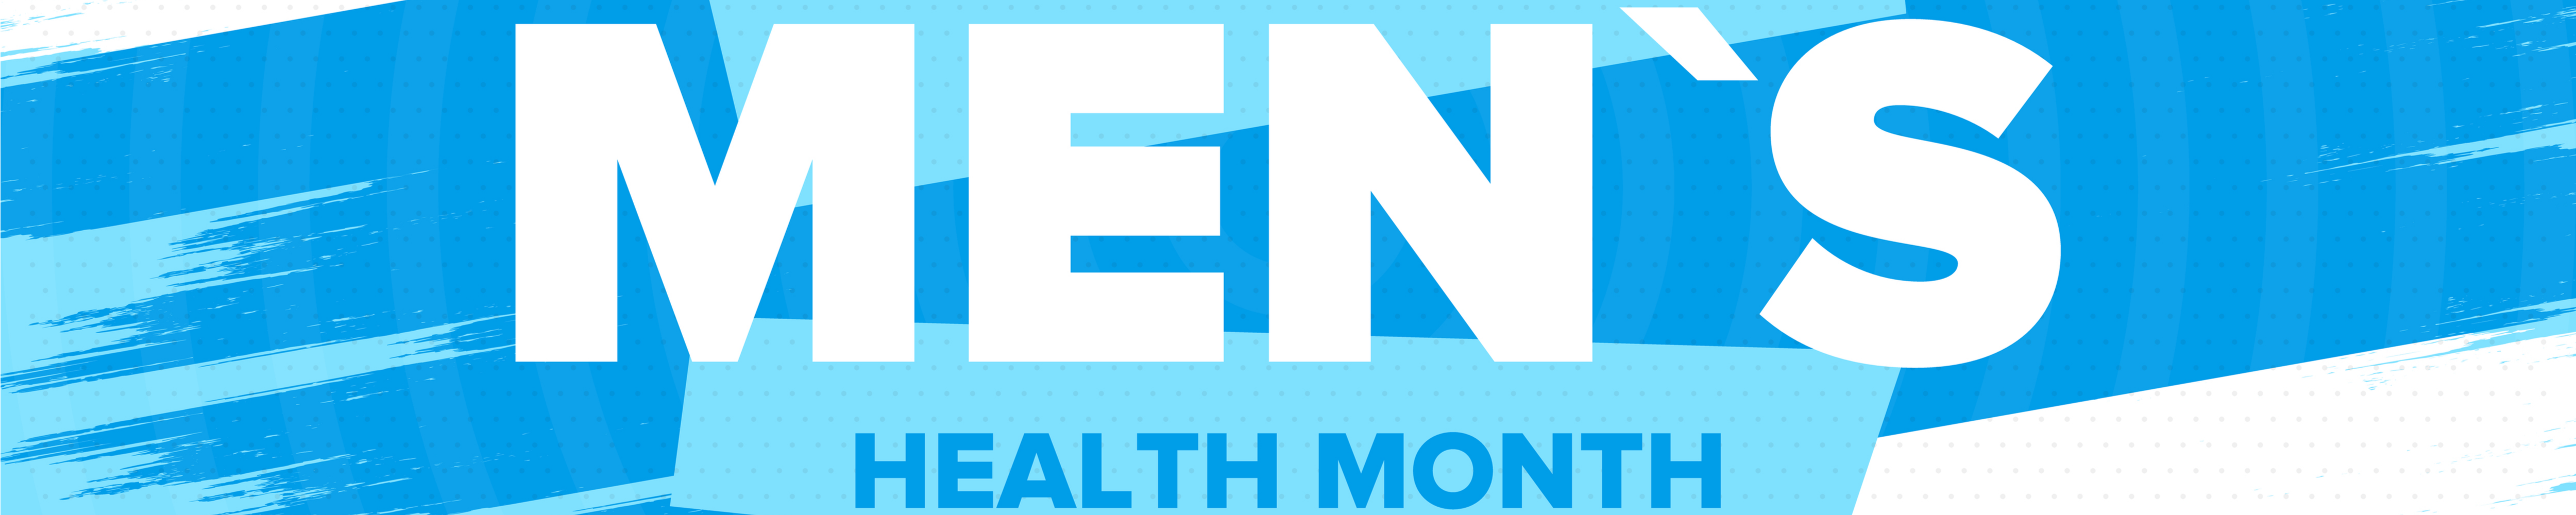 Image with the words Men's Health Month